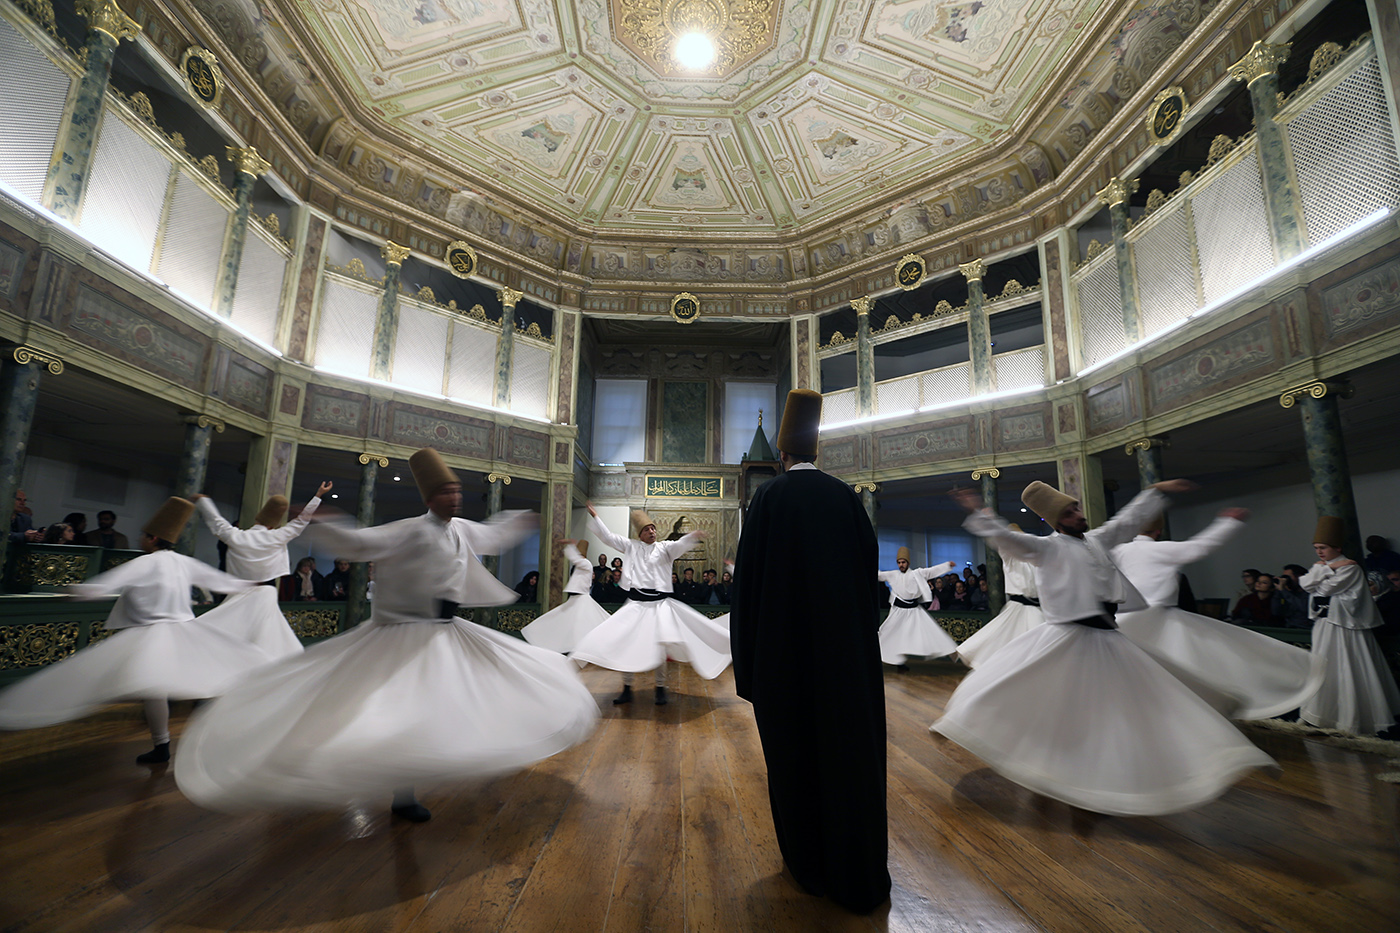 Whirling dervishes perform during the Mevlevi Sema Ceremony at Galata Mevlevihane cultural center in Istanbul, Turkey, 29 October 2017. The Sema is an old ritual combining whirling dervishes with music and poetry of Mevlana and chanting from Quran. The 13th-century poet Mevlana Jalal al-Din al-Rumi is an illustrious personage of Sufism, the mystical form of Islam that preaches tolerance and love.